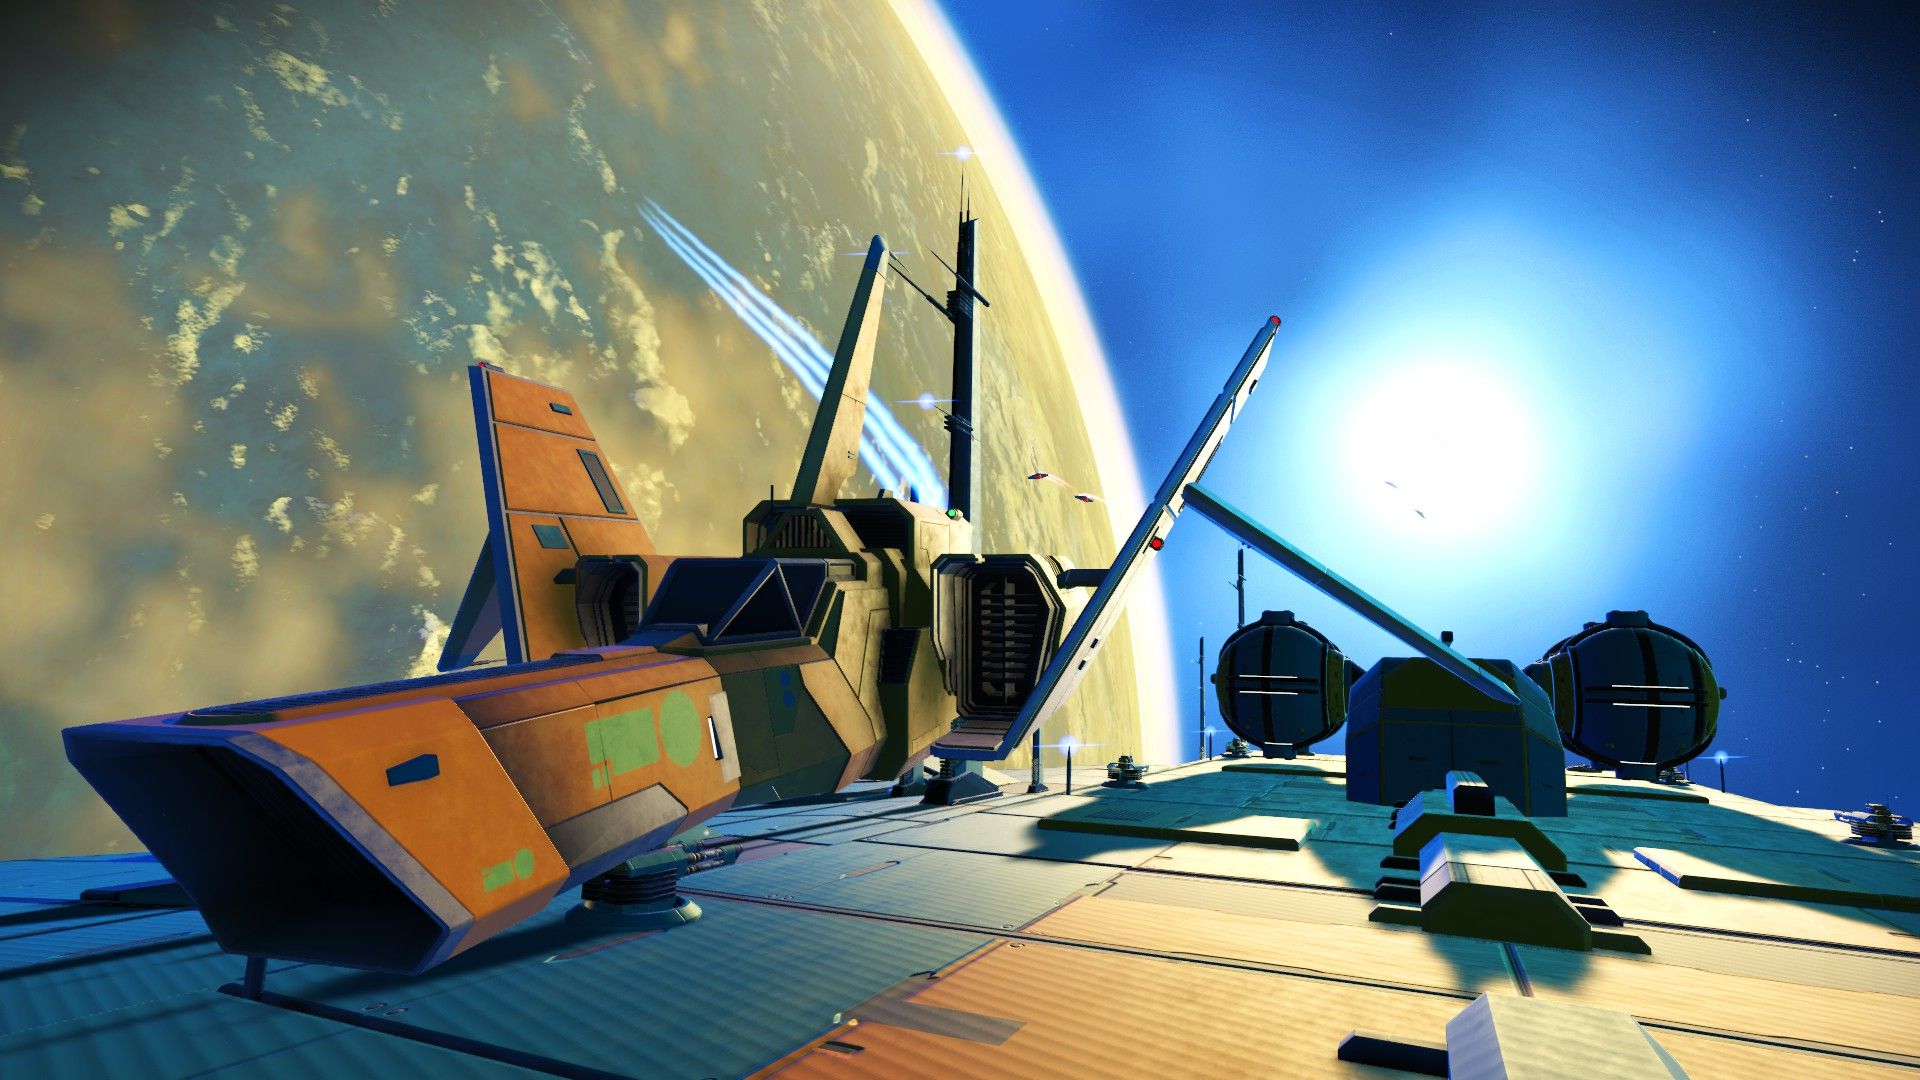 Amazing photos of space as captured in No Mans Sky image 30